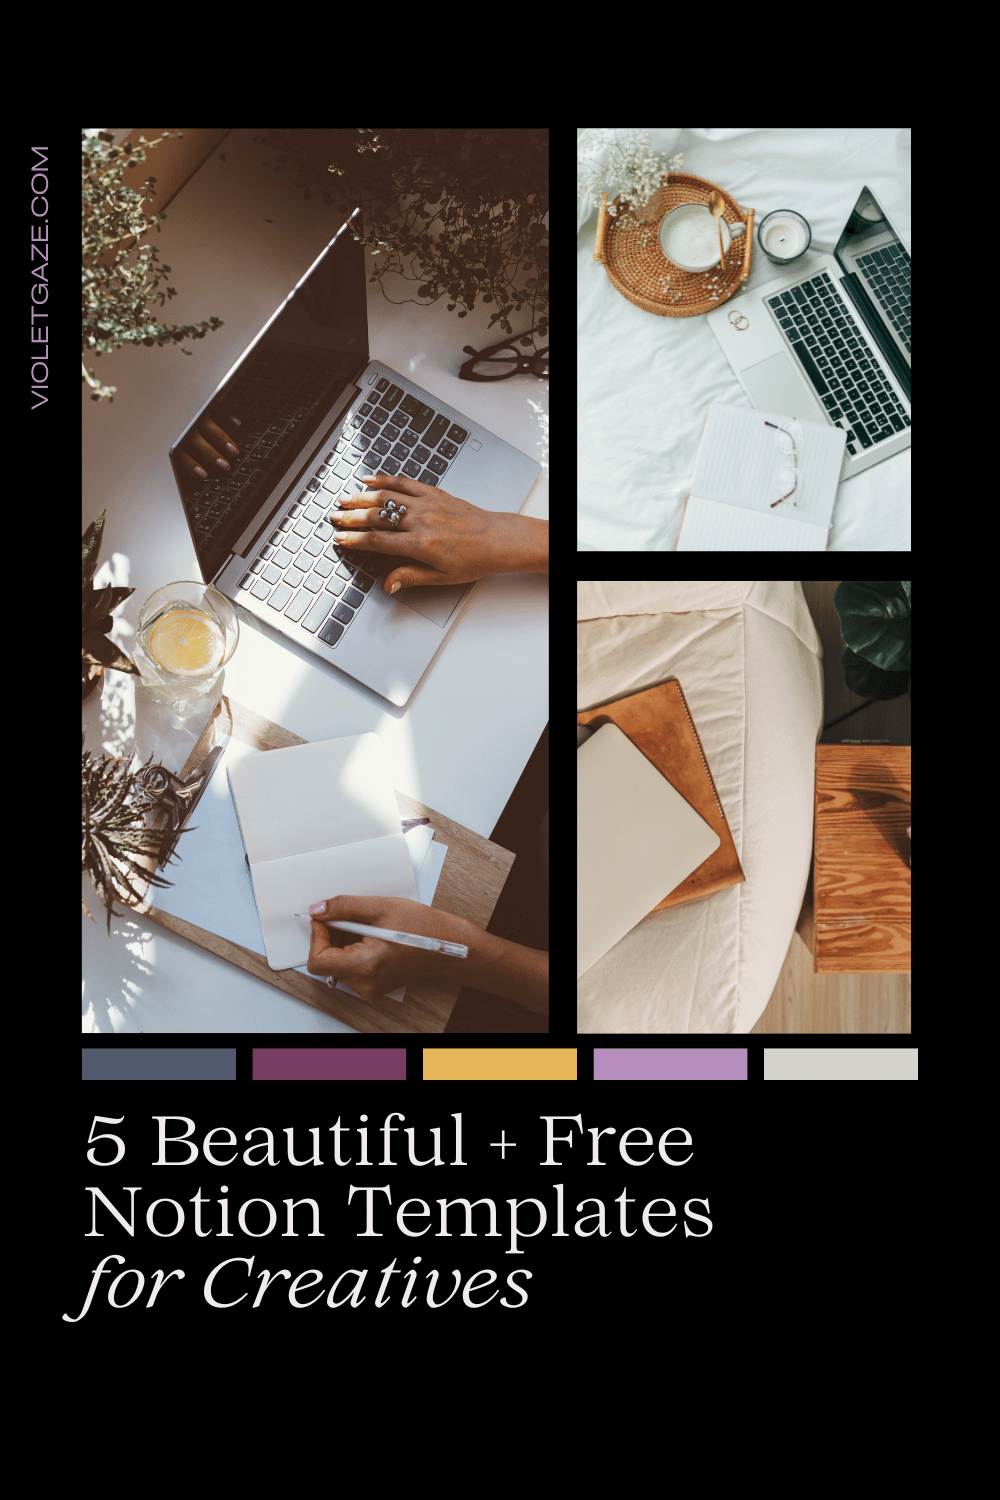 5 beautiful for free notion template for creative